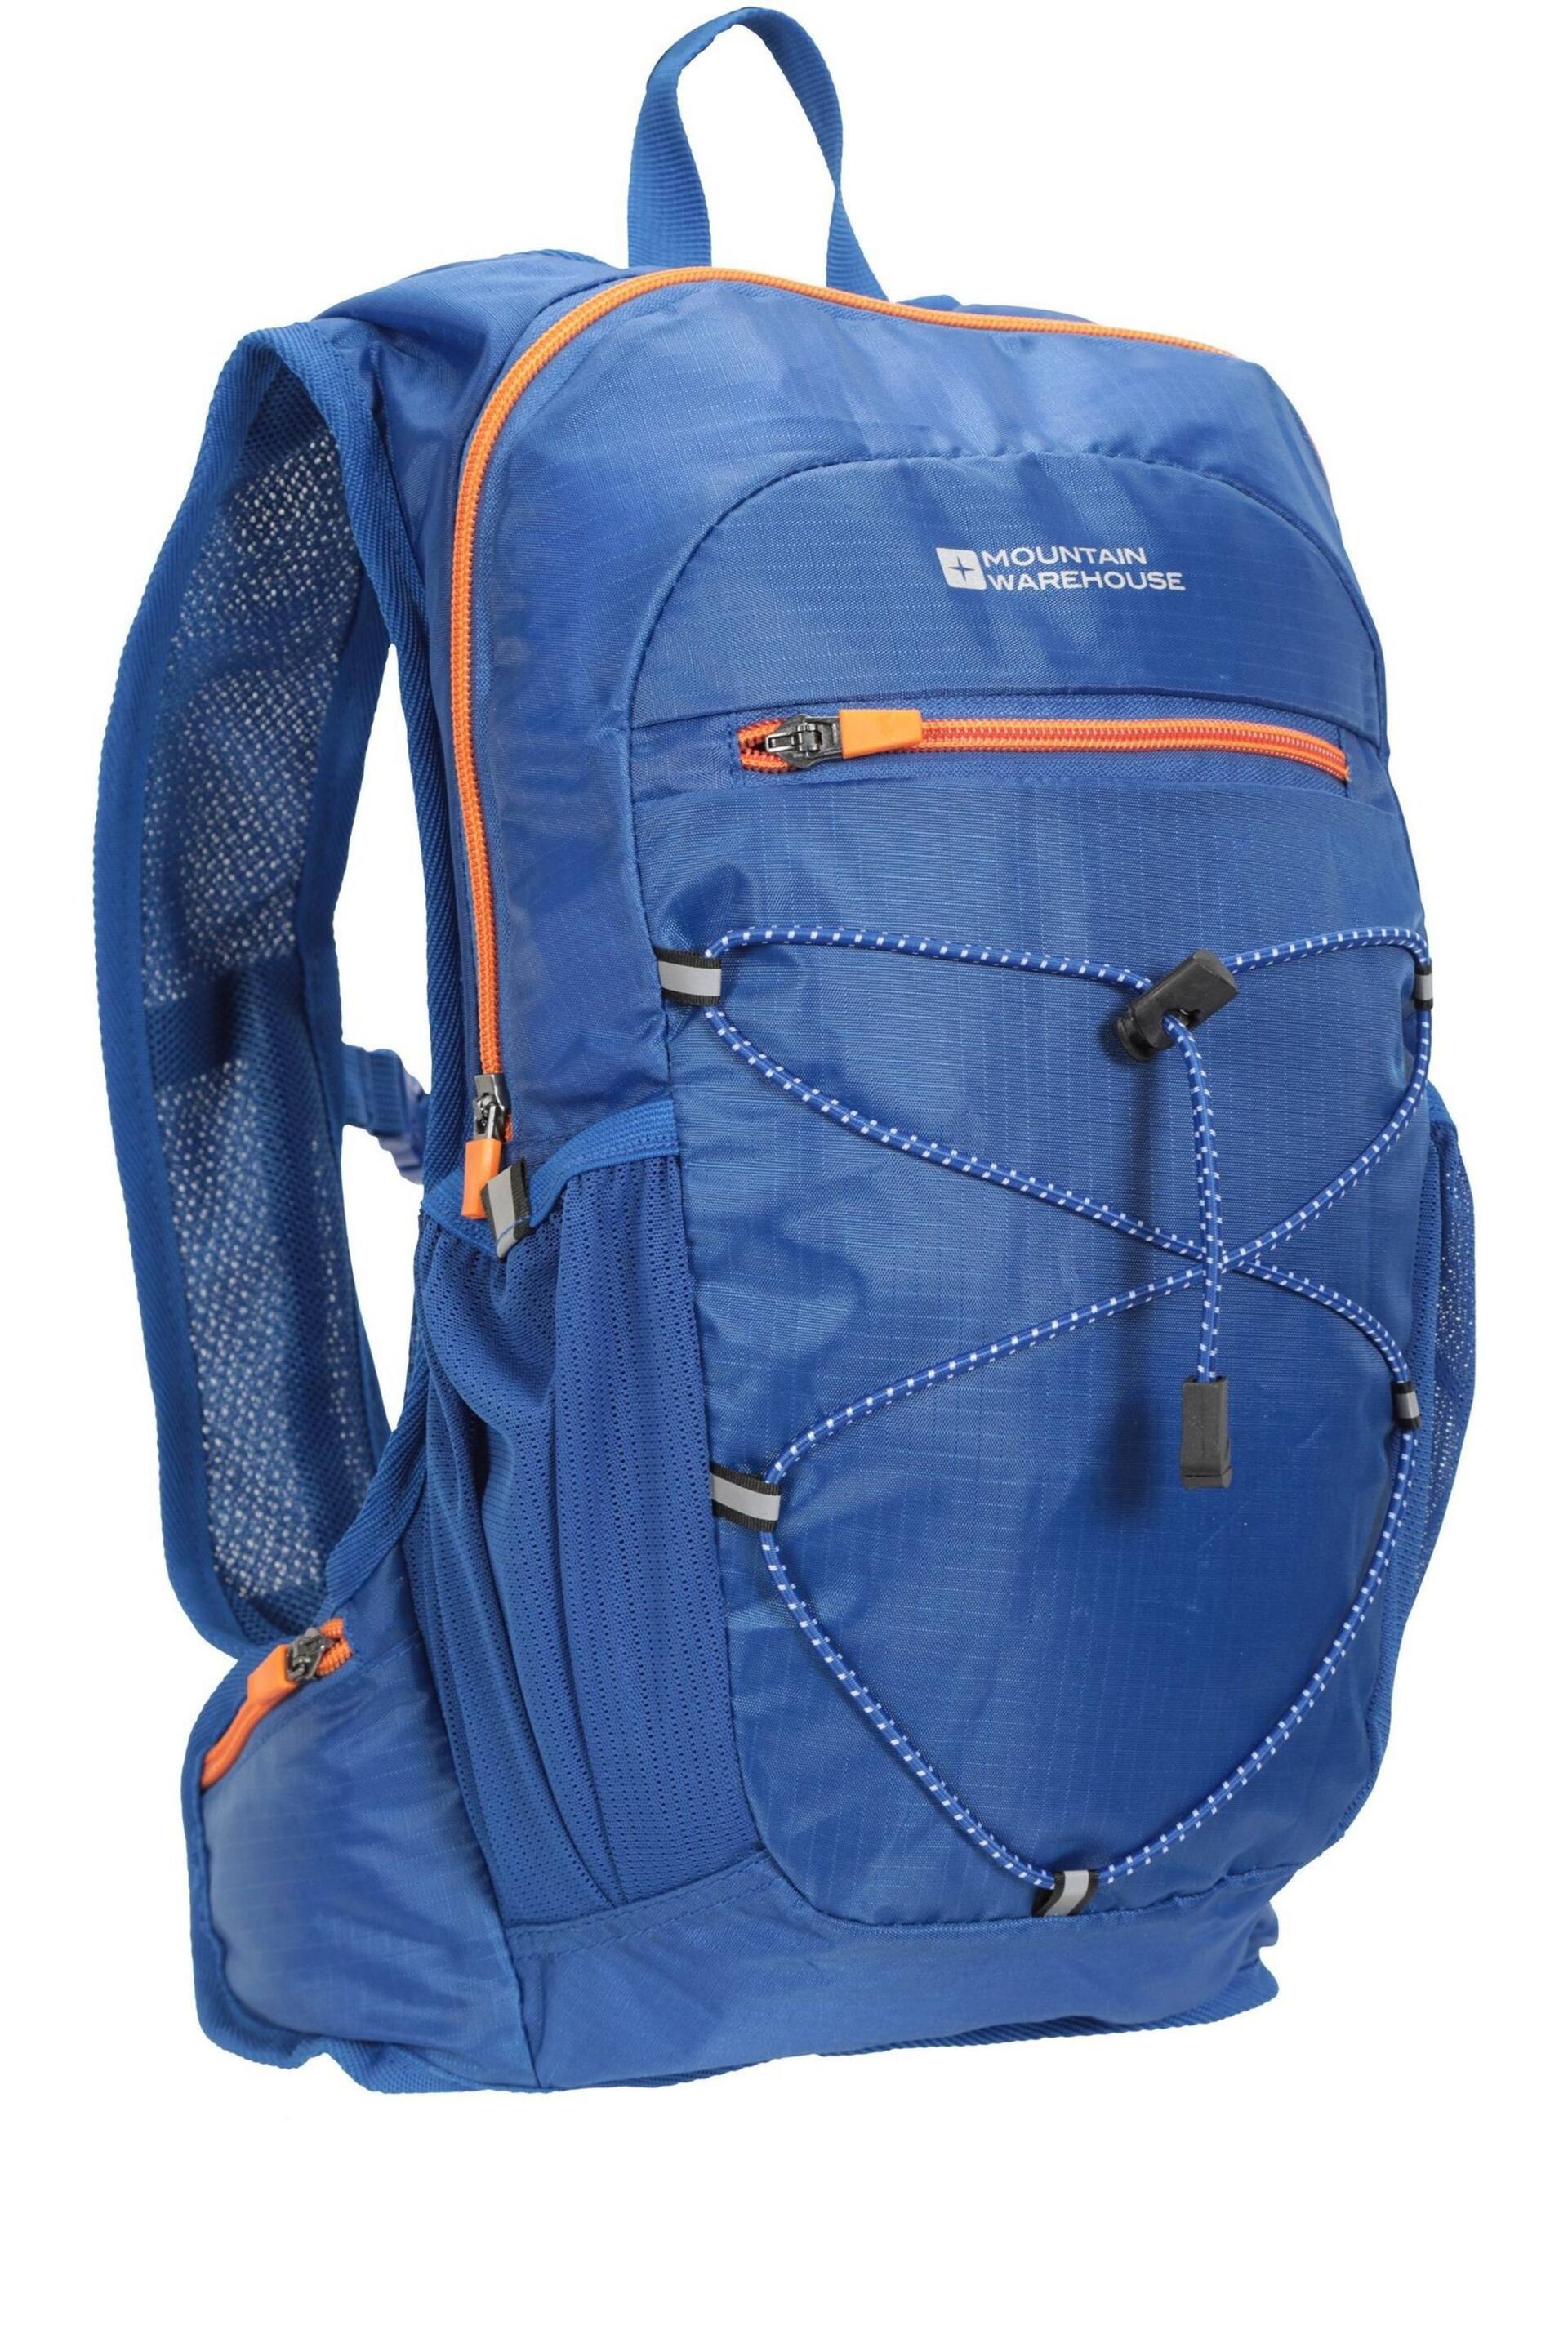 Mountain Warehouse Blue Track Hydro Bag - 6L - Image 3 of 5